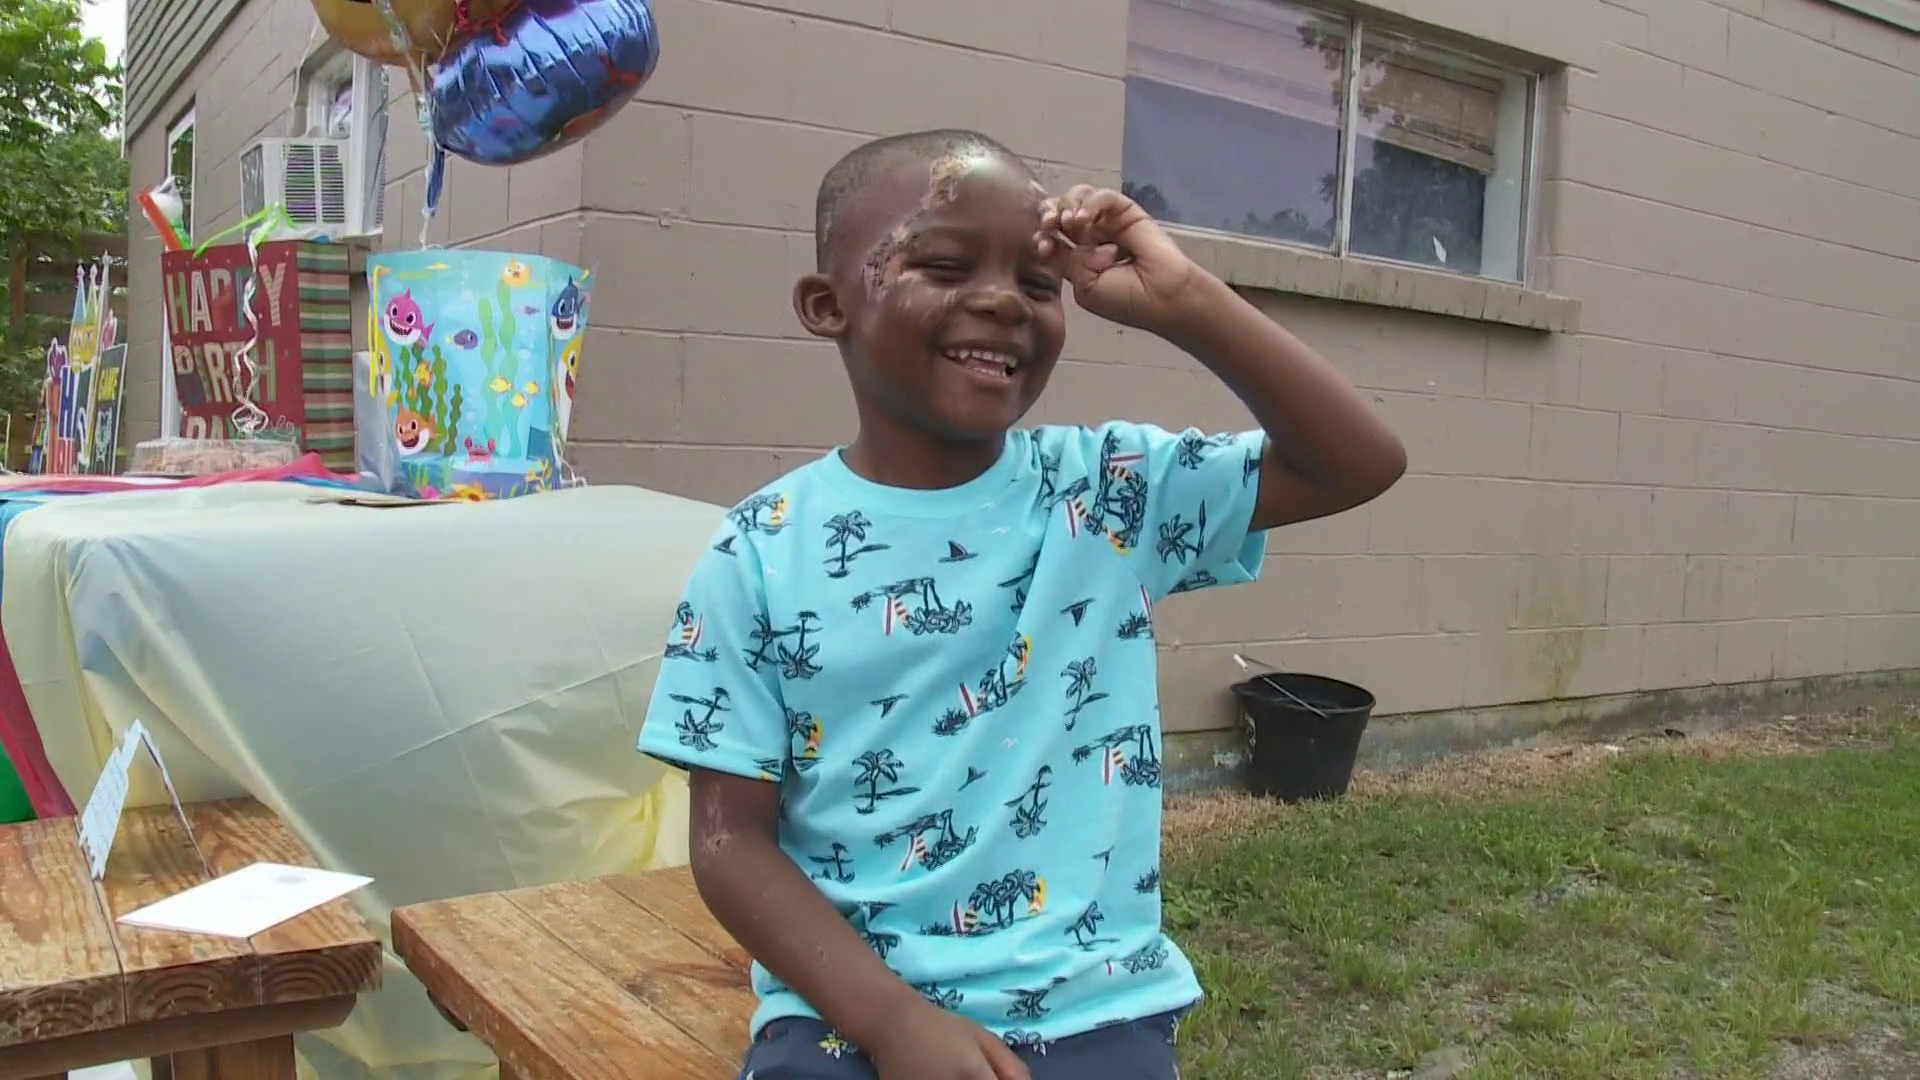 Child hit by car July 4 home from hospital on 5th birthday